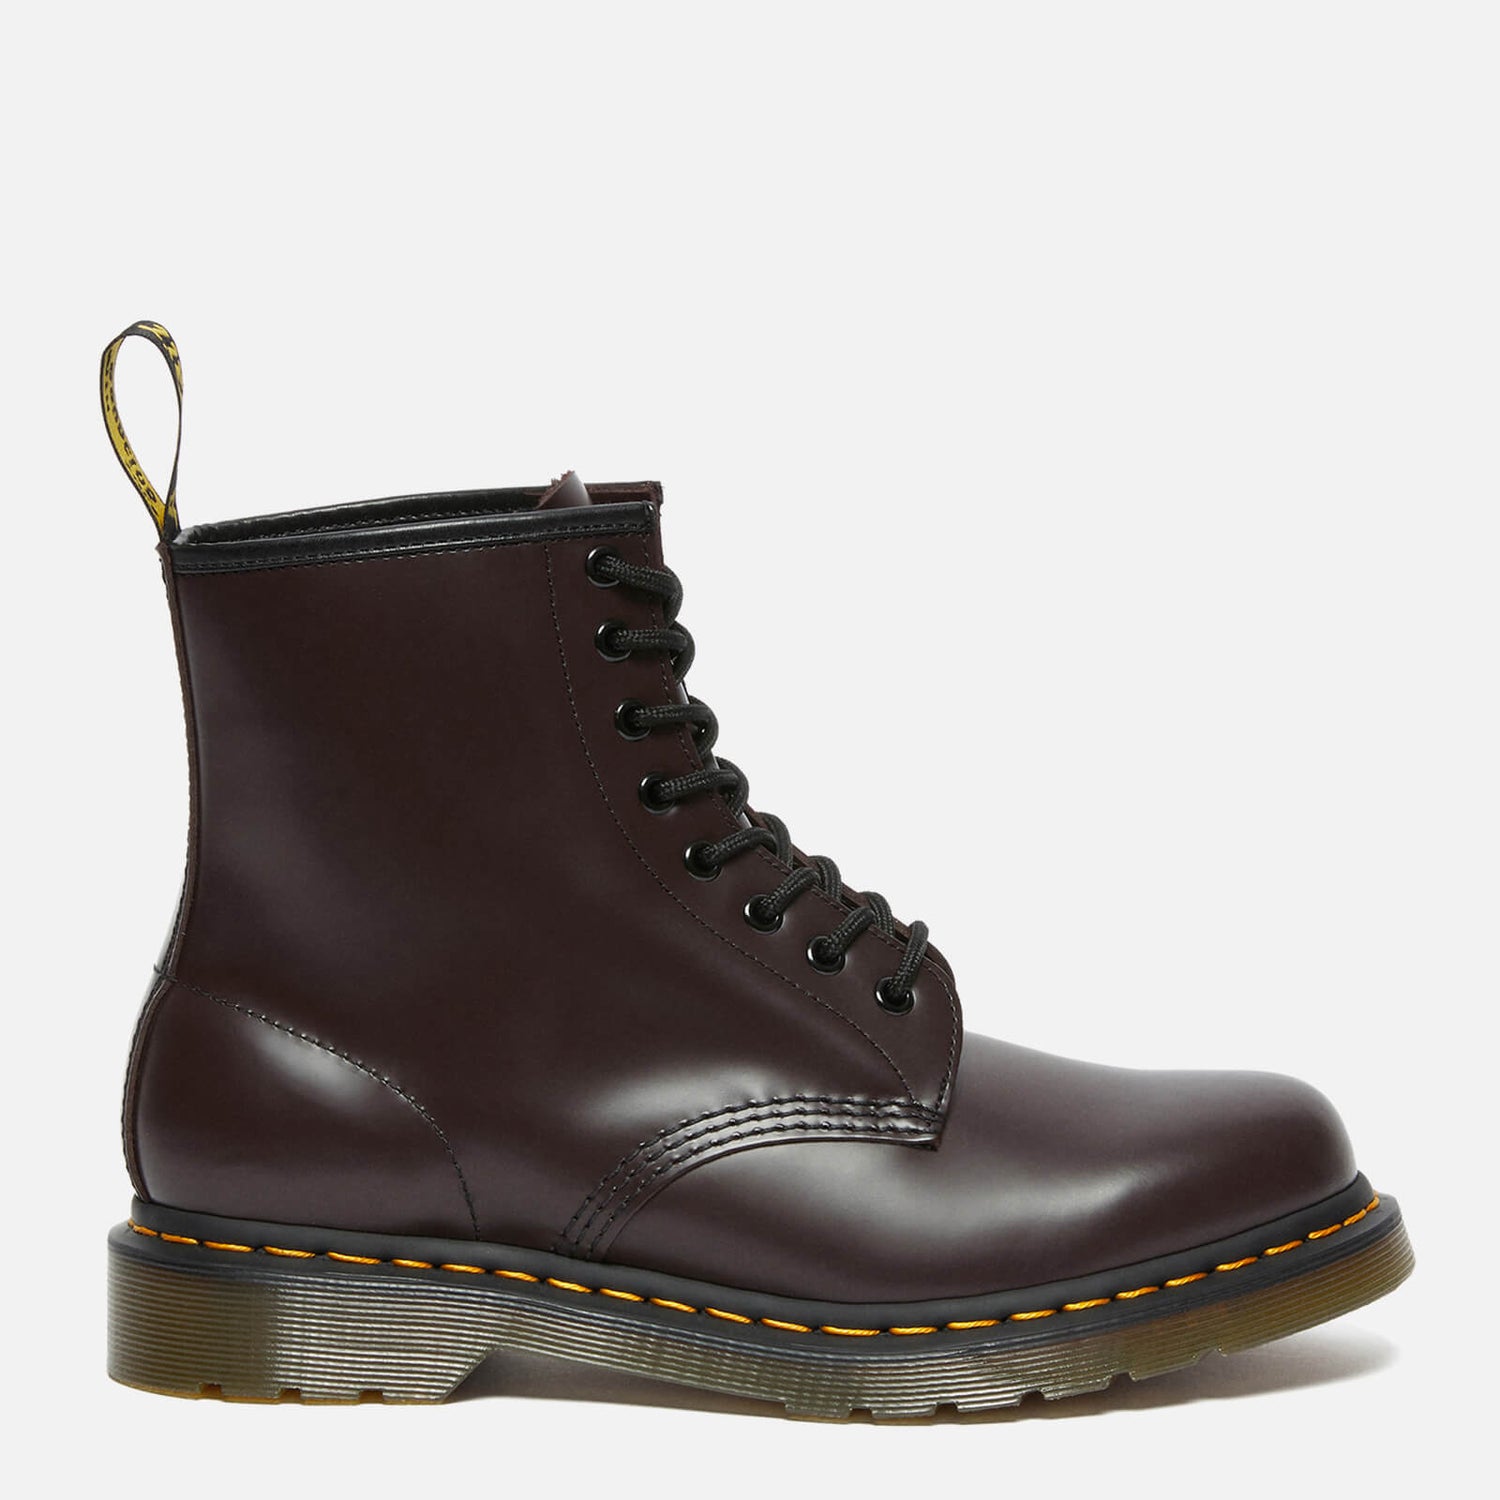 Dr. Martens Men's 1460 Smooth Leather 8-Eye Boots - Burgundy